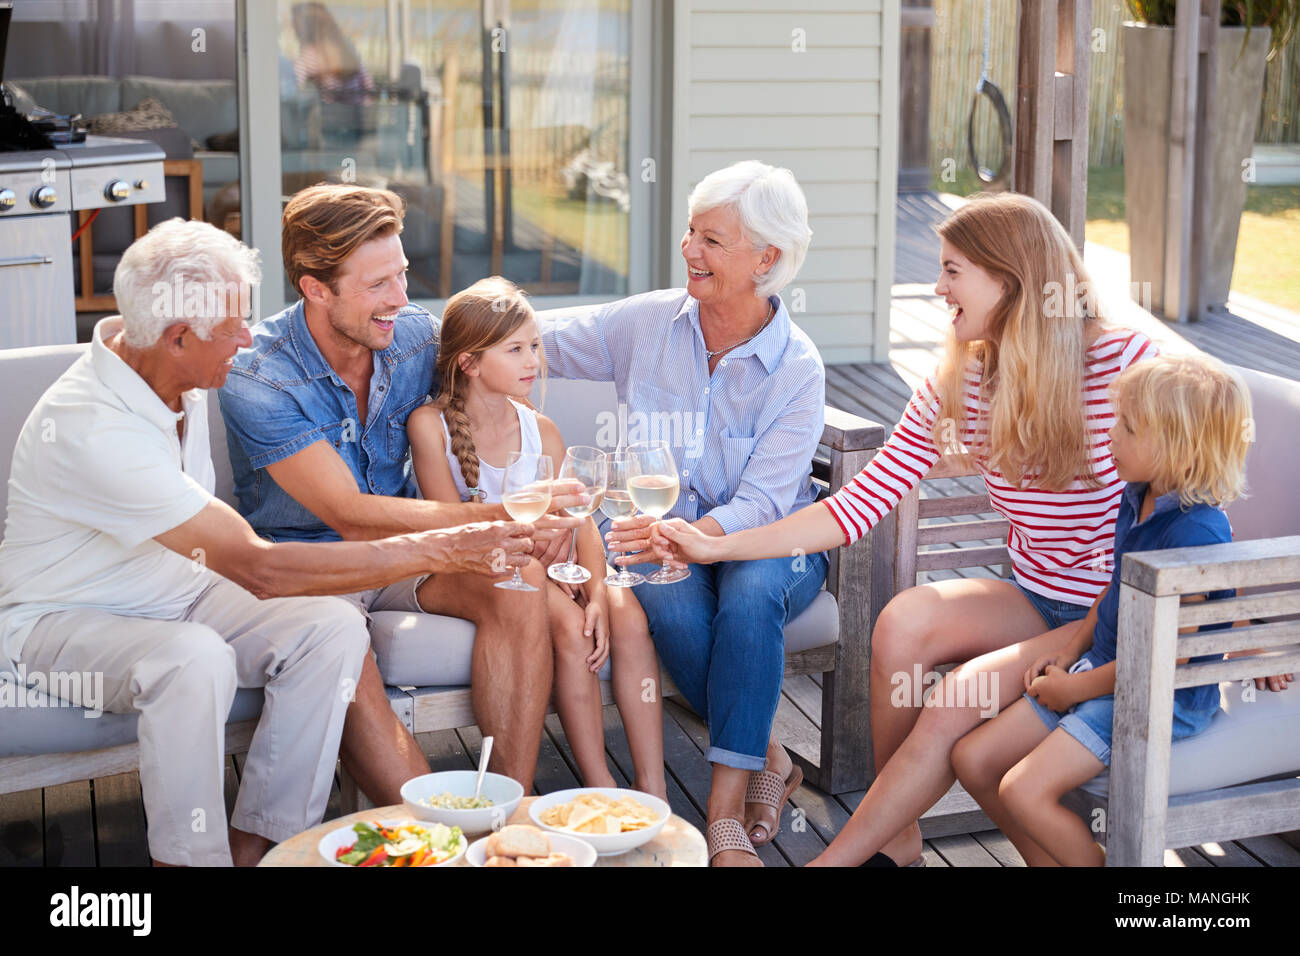 Multi Generation Family Enjoy Outdoor Drinks And Snacks At Home Stock Photo